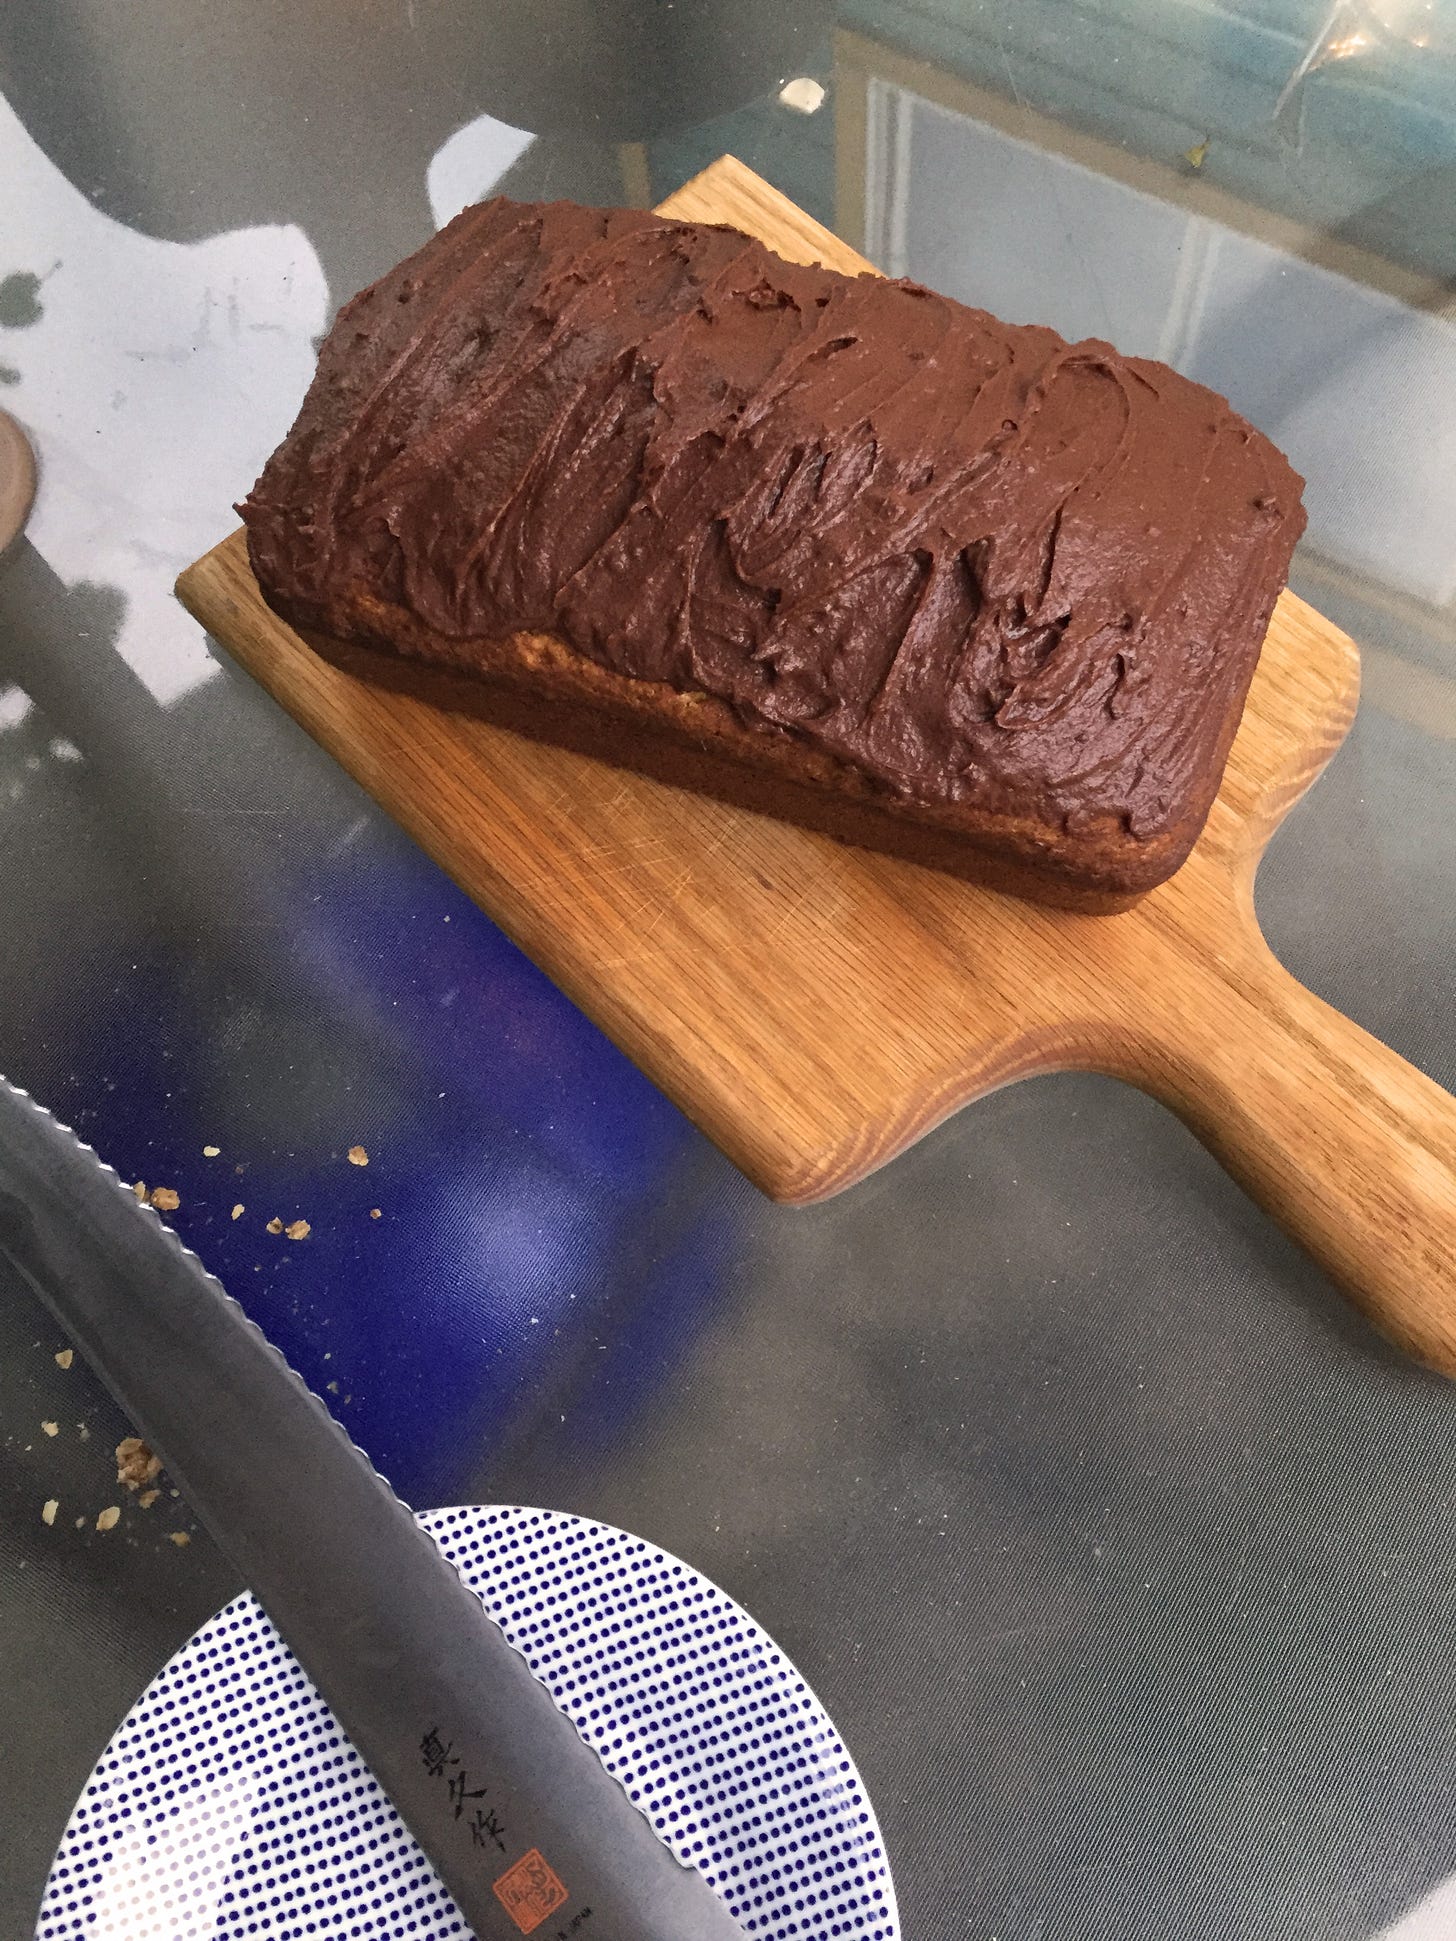 On a small wooden bread board, a loaf of banana bread with swirls of chocolate ganache spread on top. A bread knife sits on the table to its lower left.